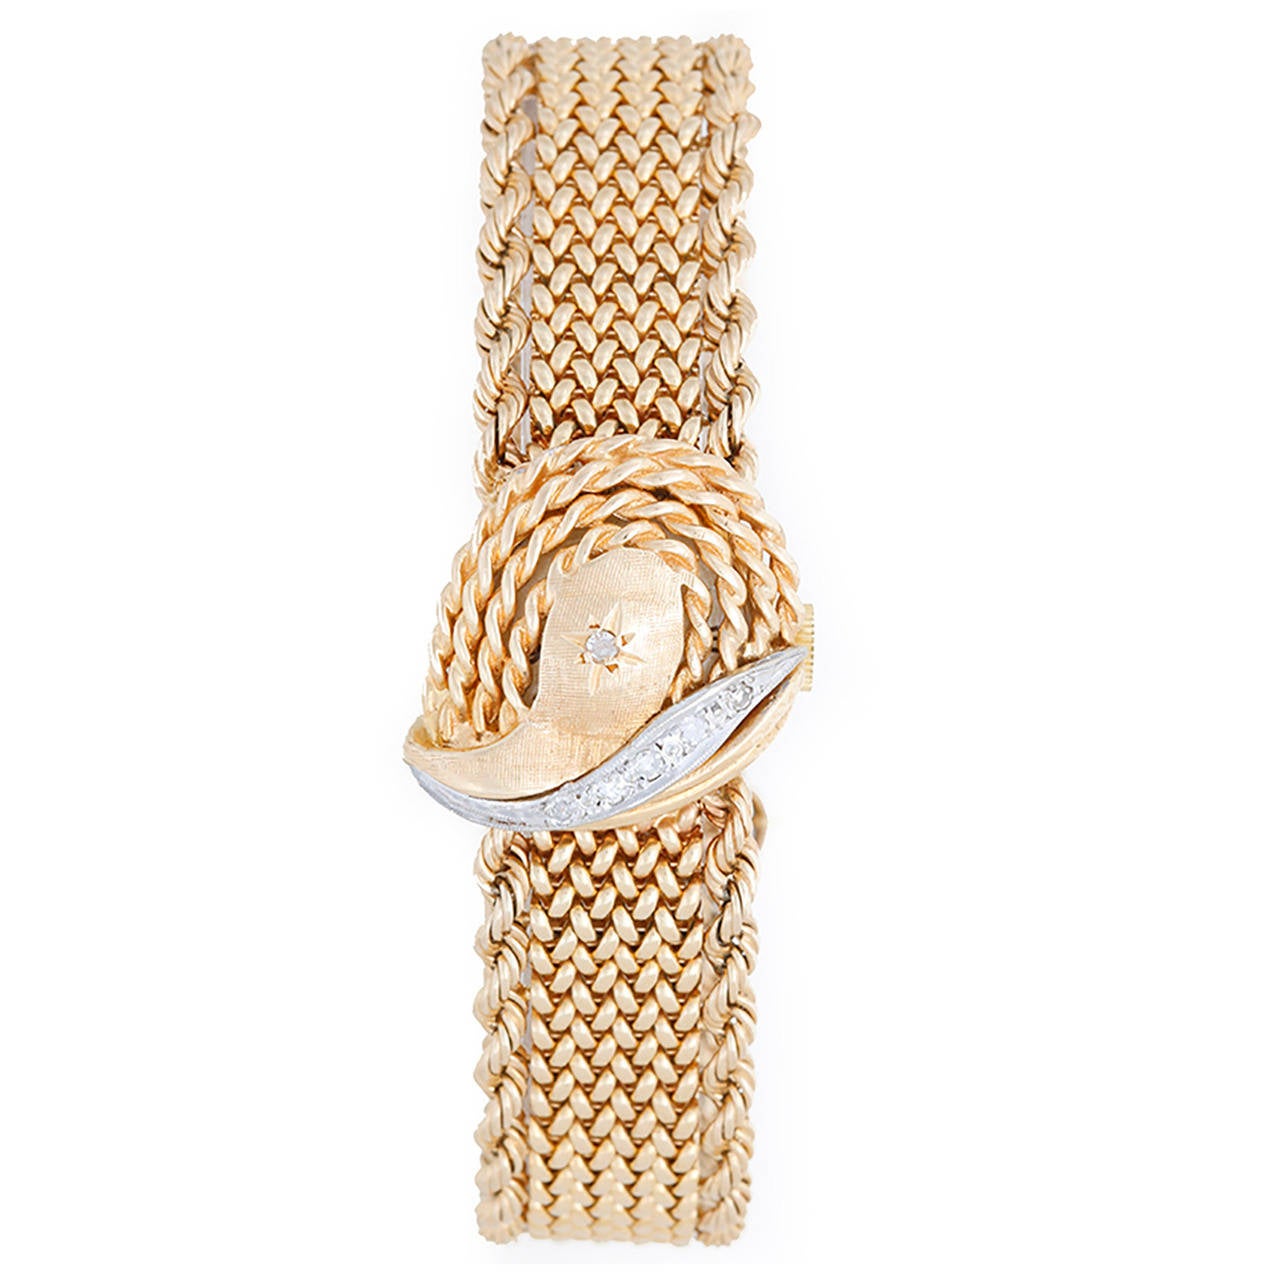 Luva Lady's Yellow Gold and Diamond Wristwatch with Concealed Dial